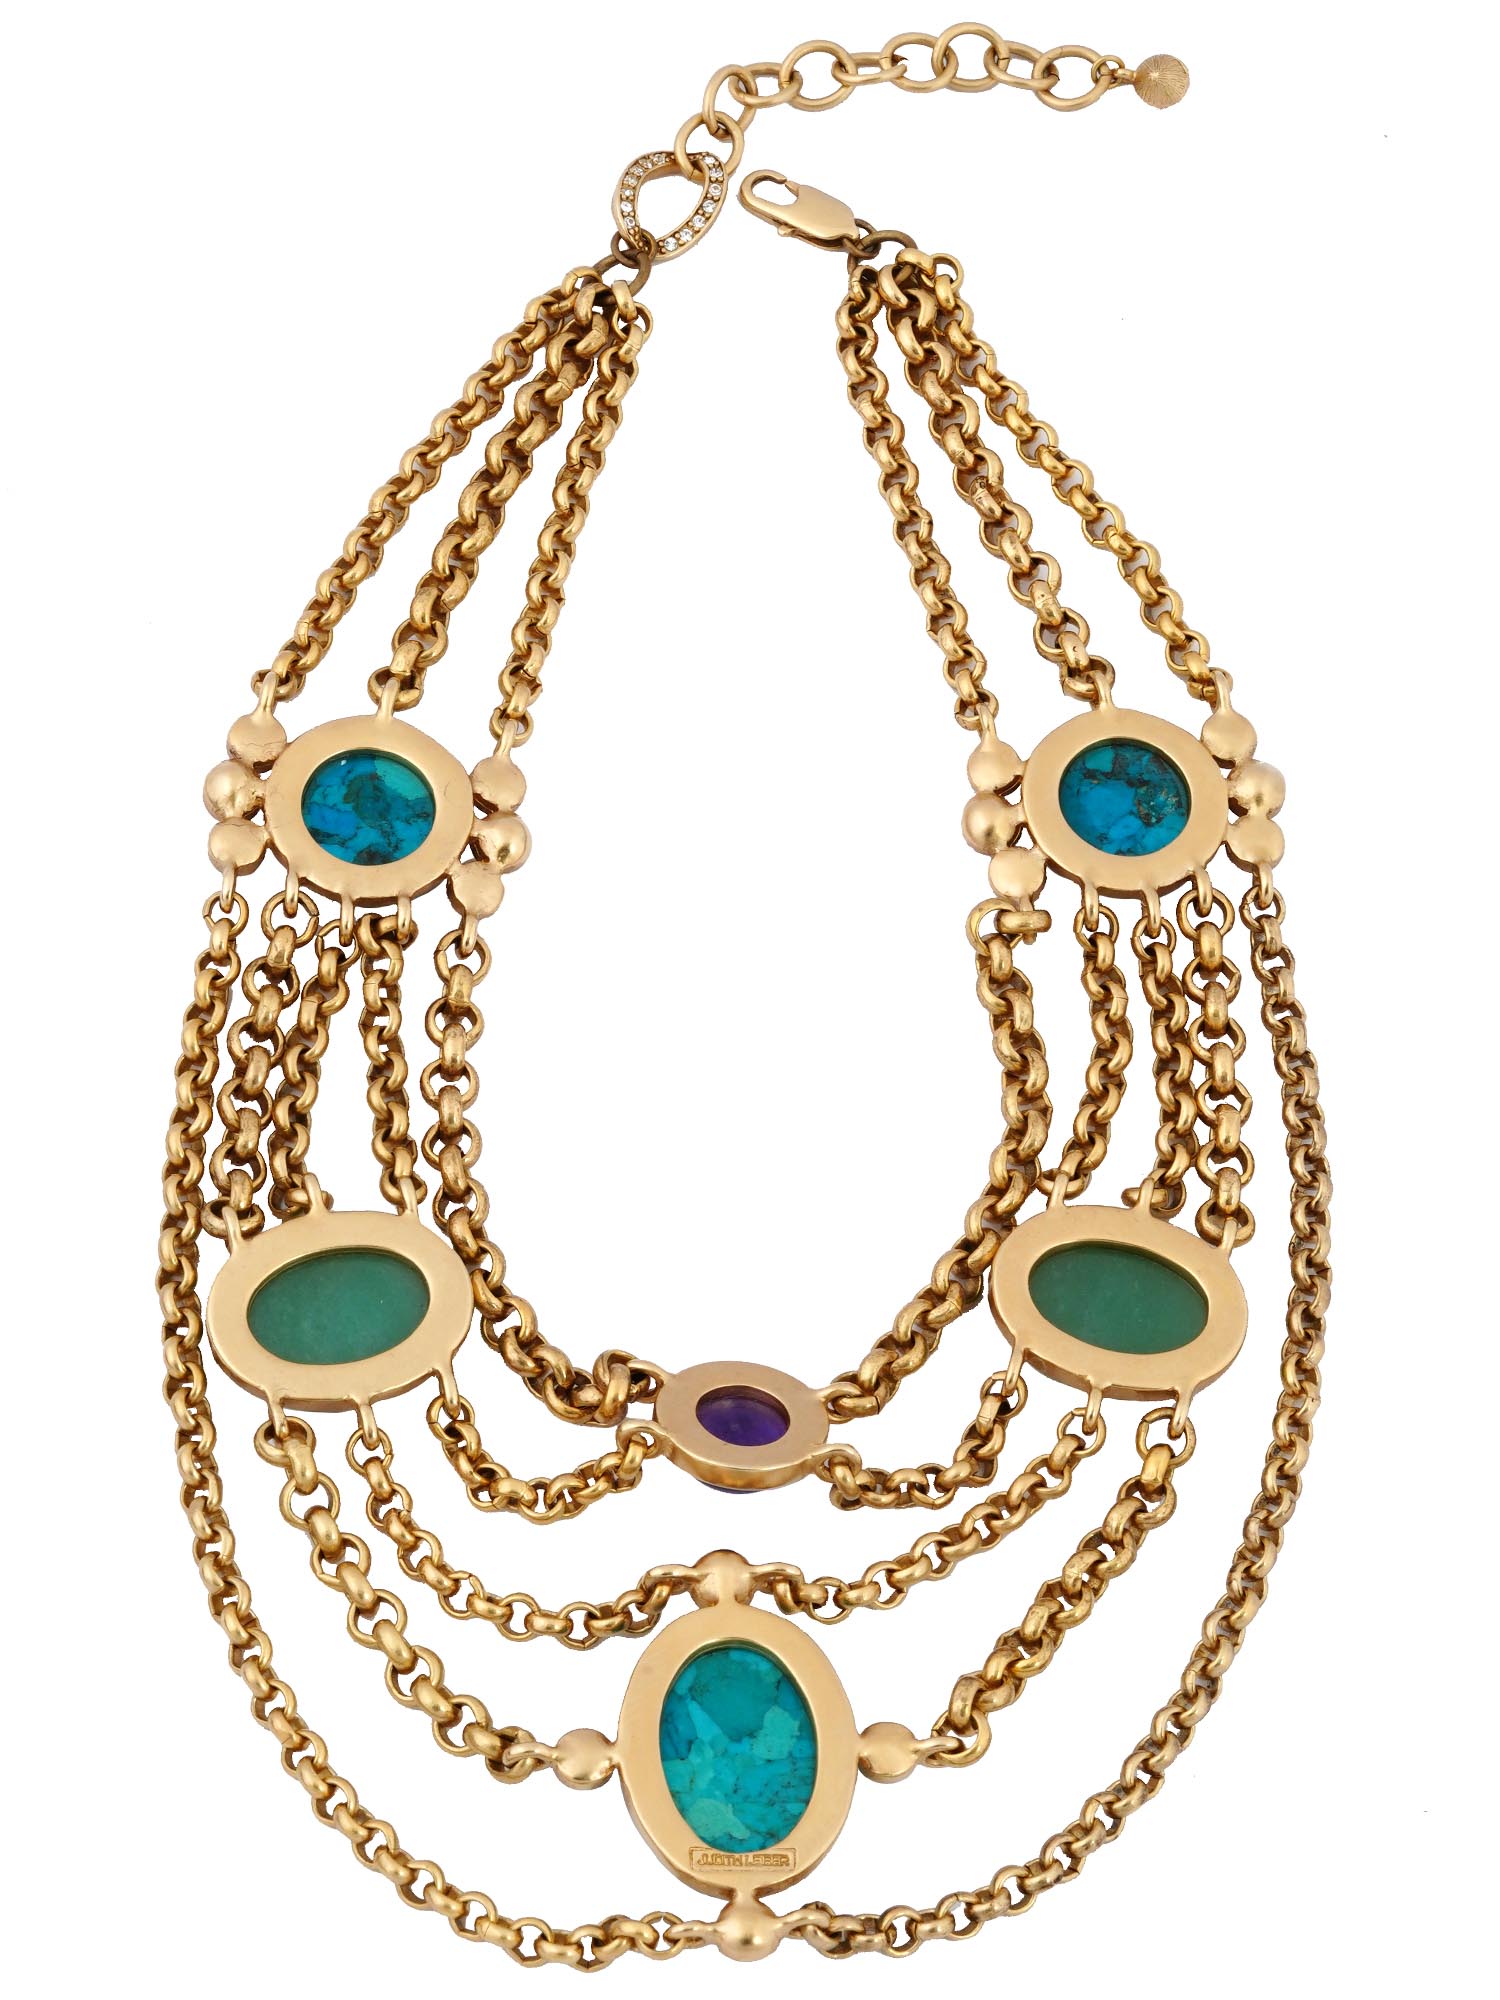 JUDITH LEIBER SHEBA GOLD PLATED COLLAR NECKLACE PIC-3